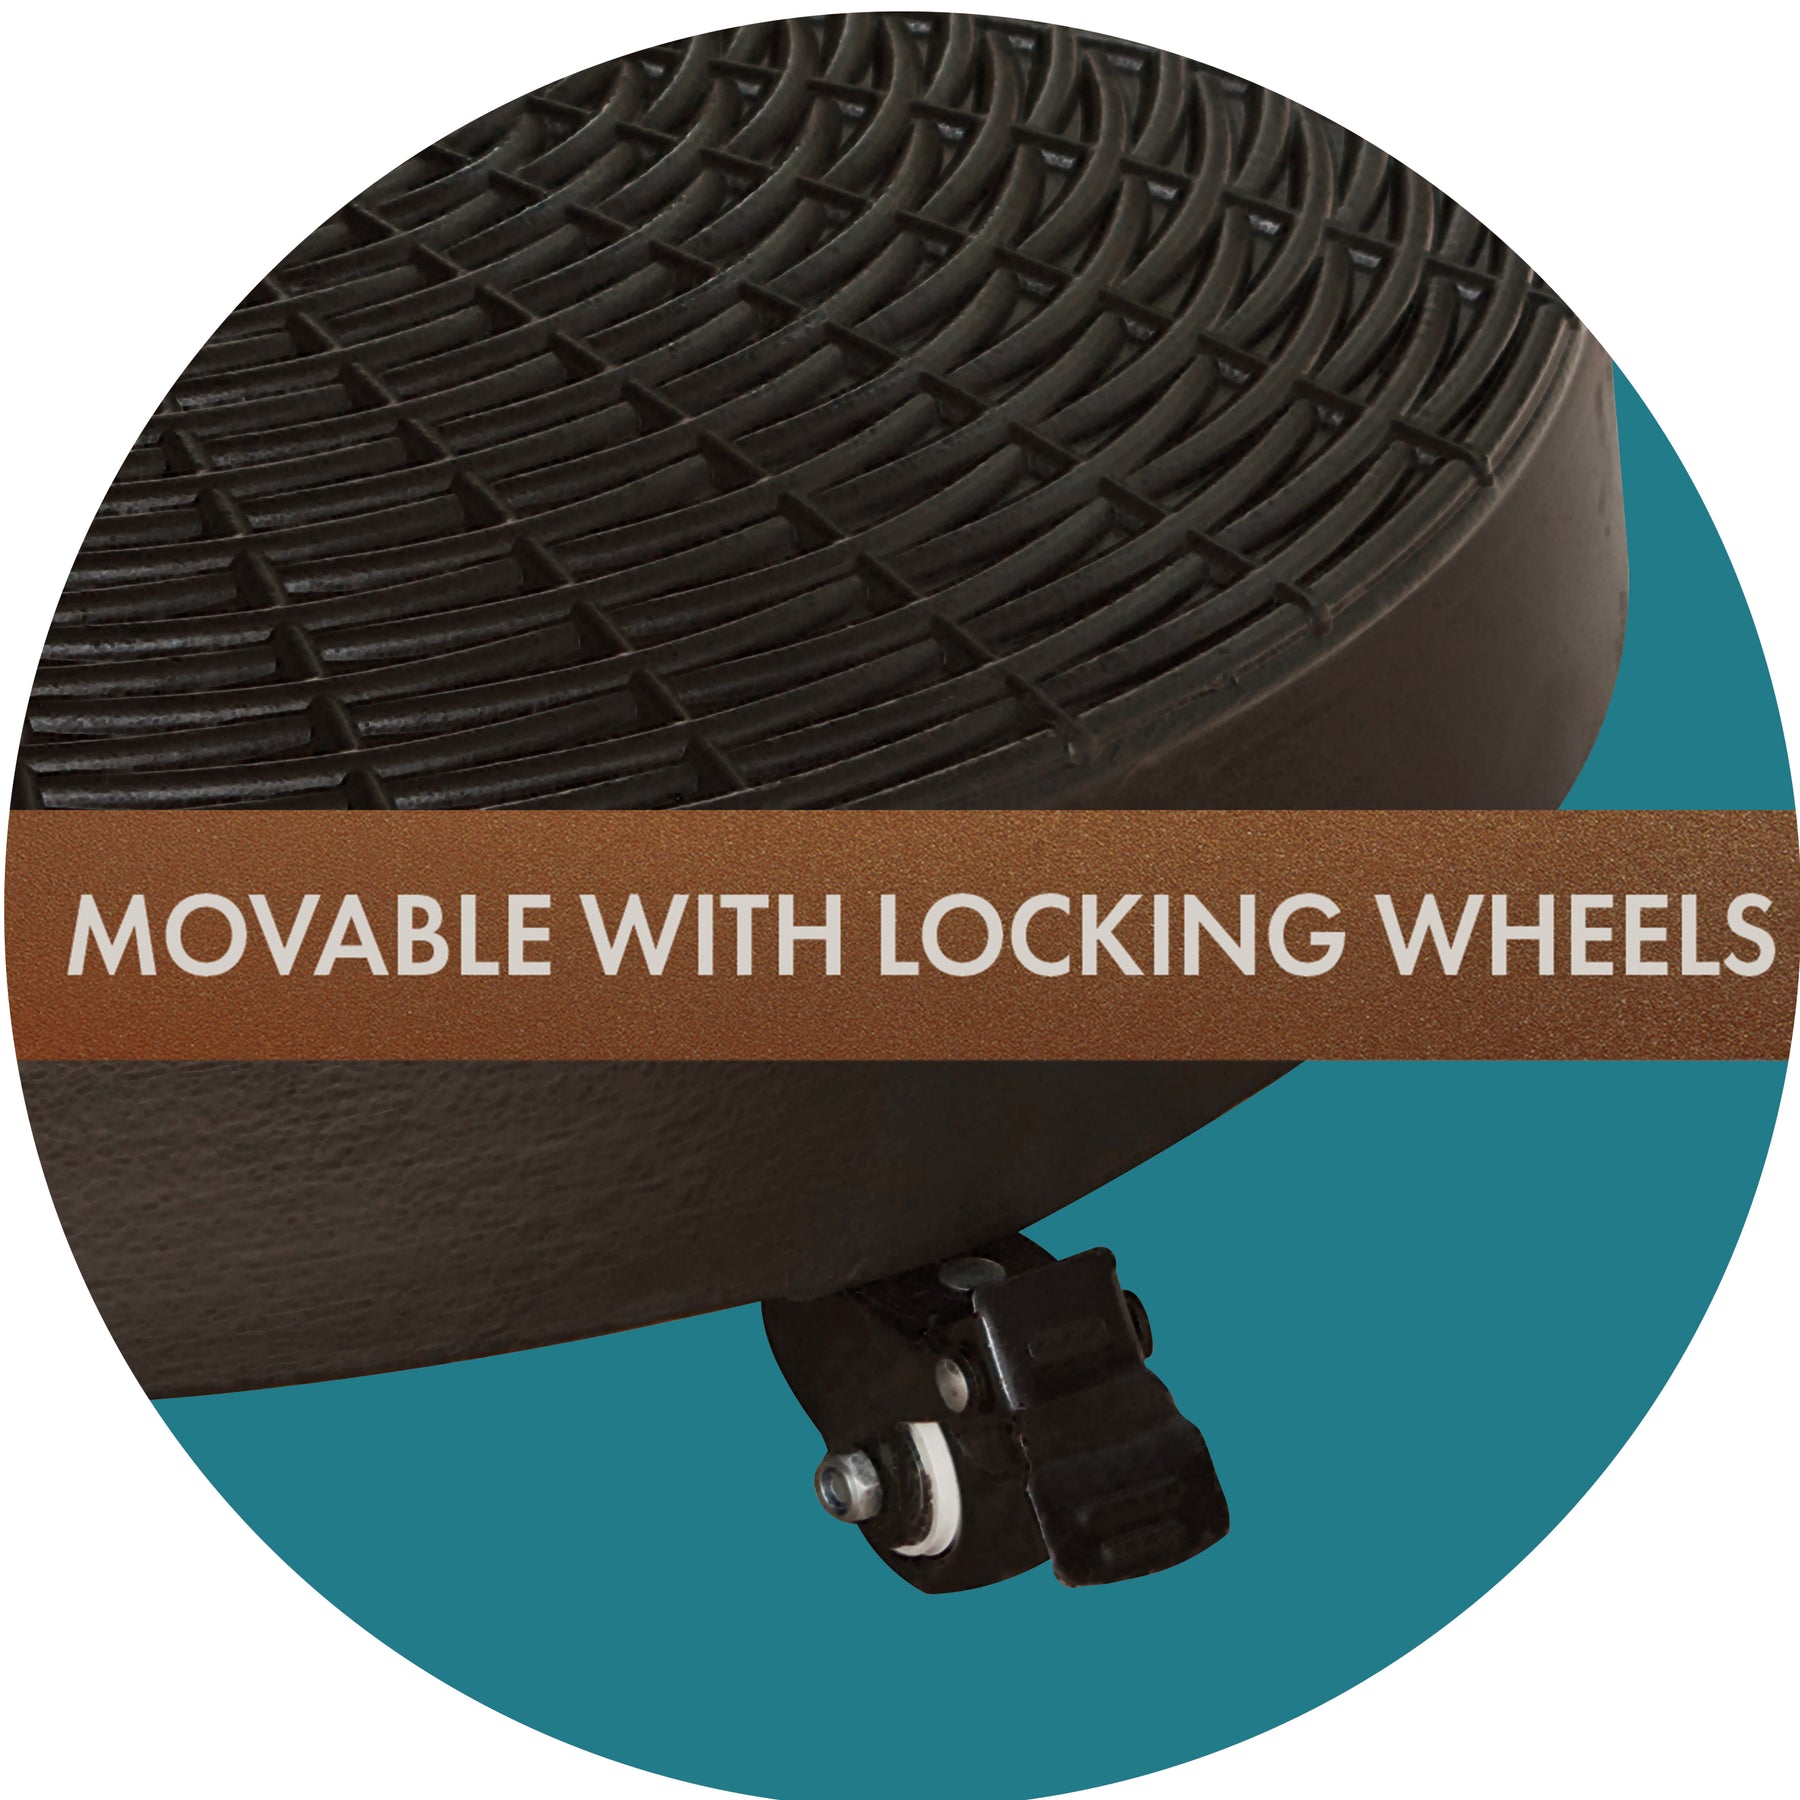 Movable with locking wheels.